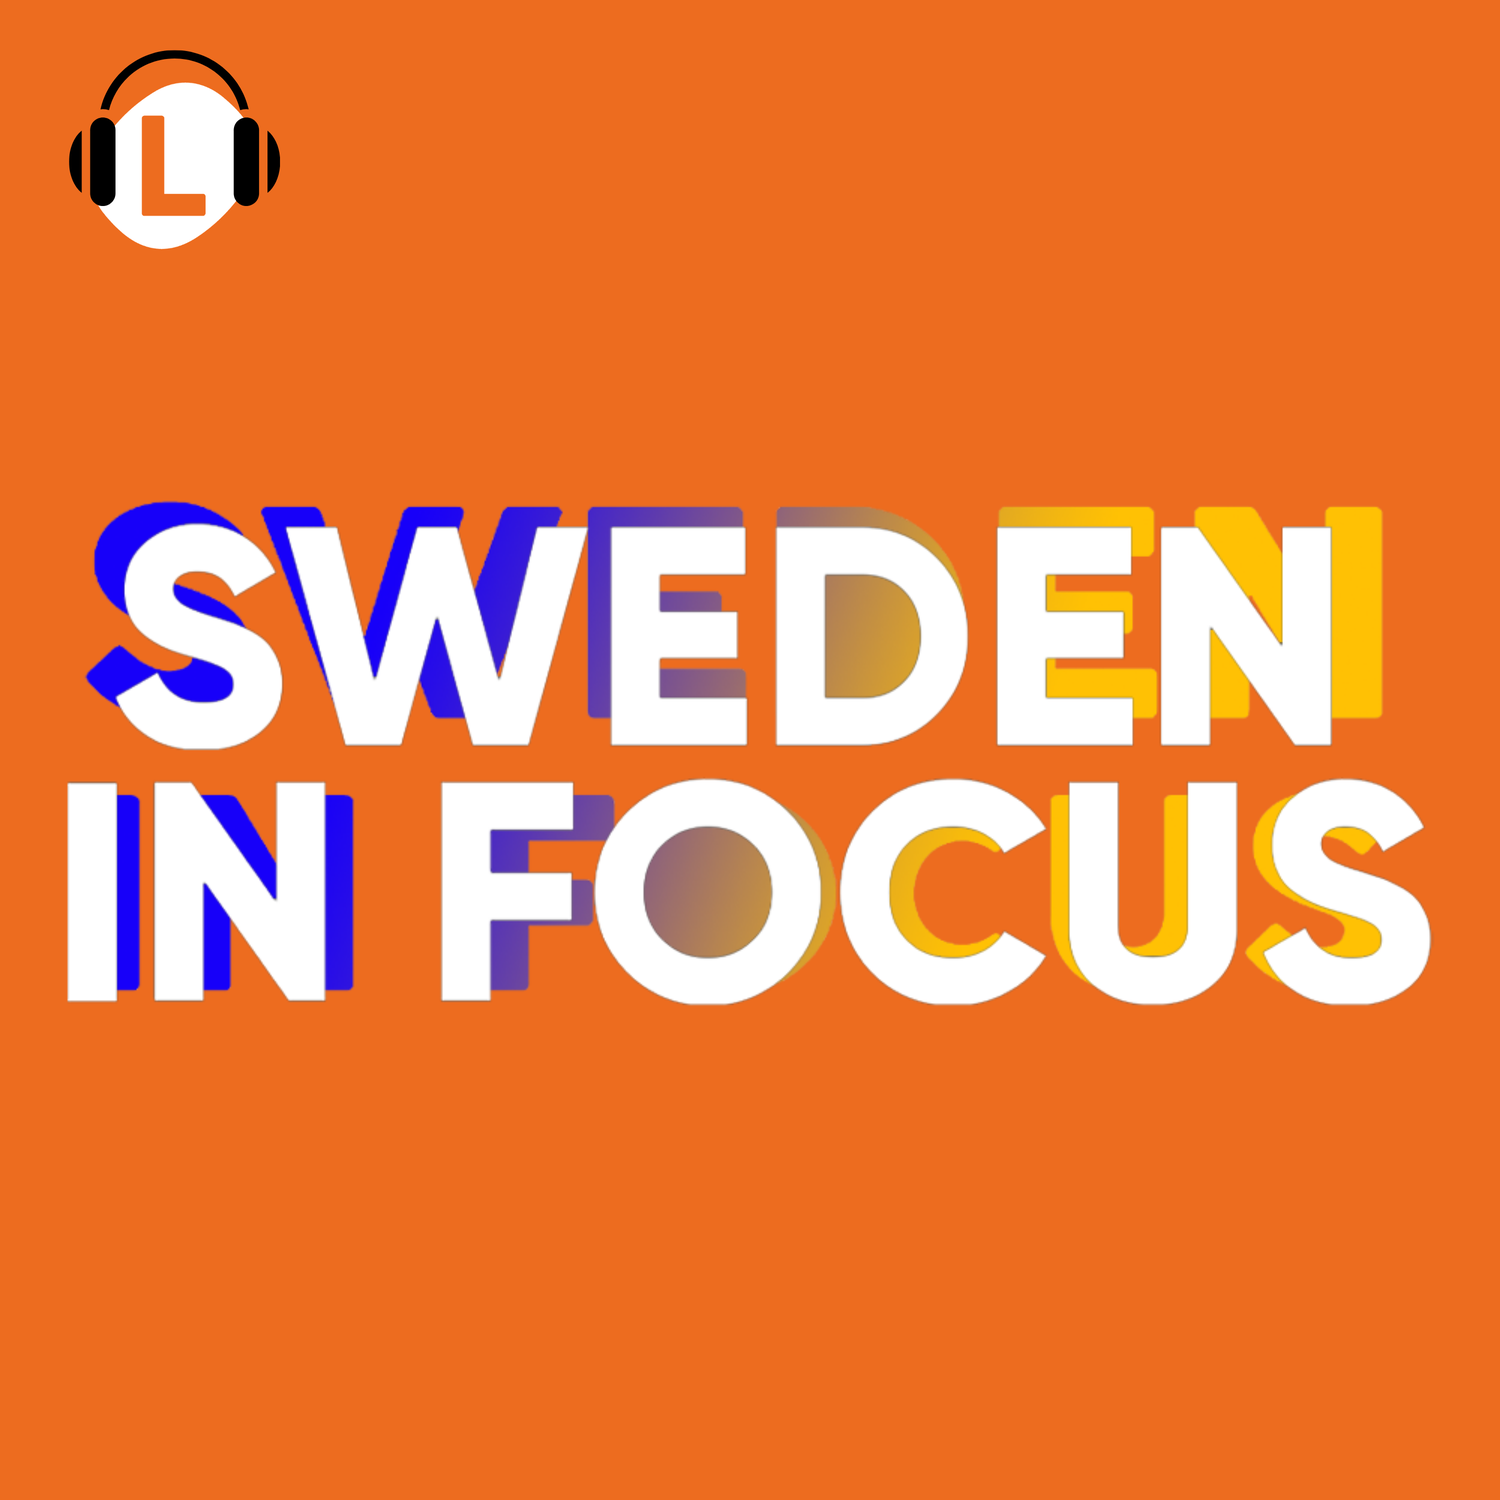 INTERVIEW: 'Lots of kids growing up in Sweden are not allowed to feel Swedish'